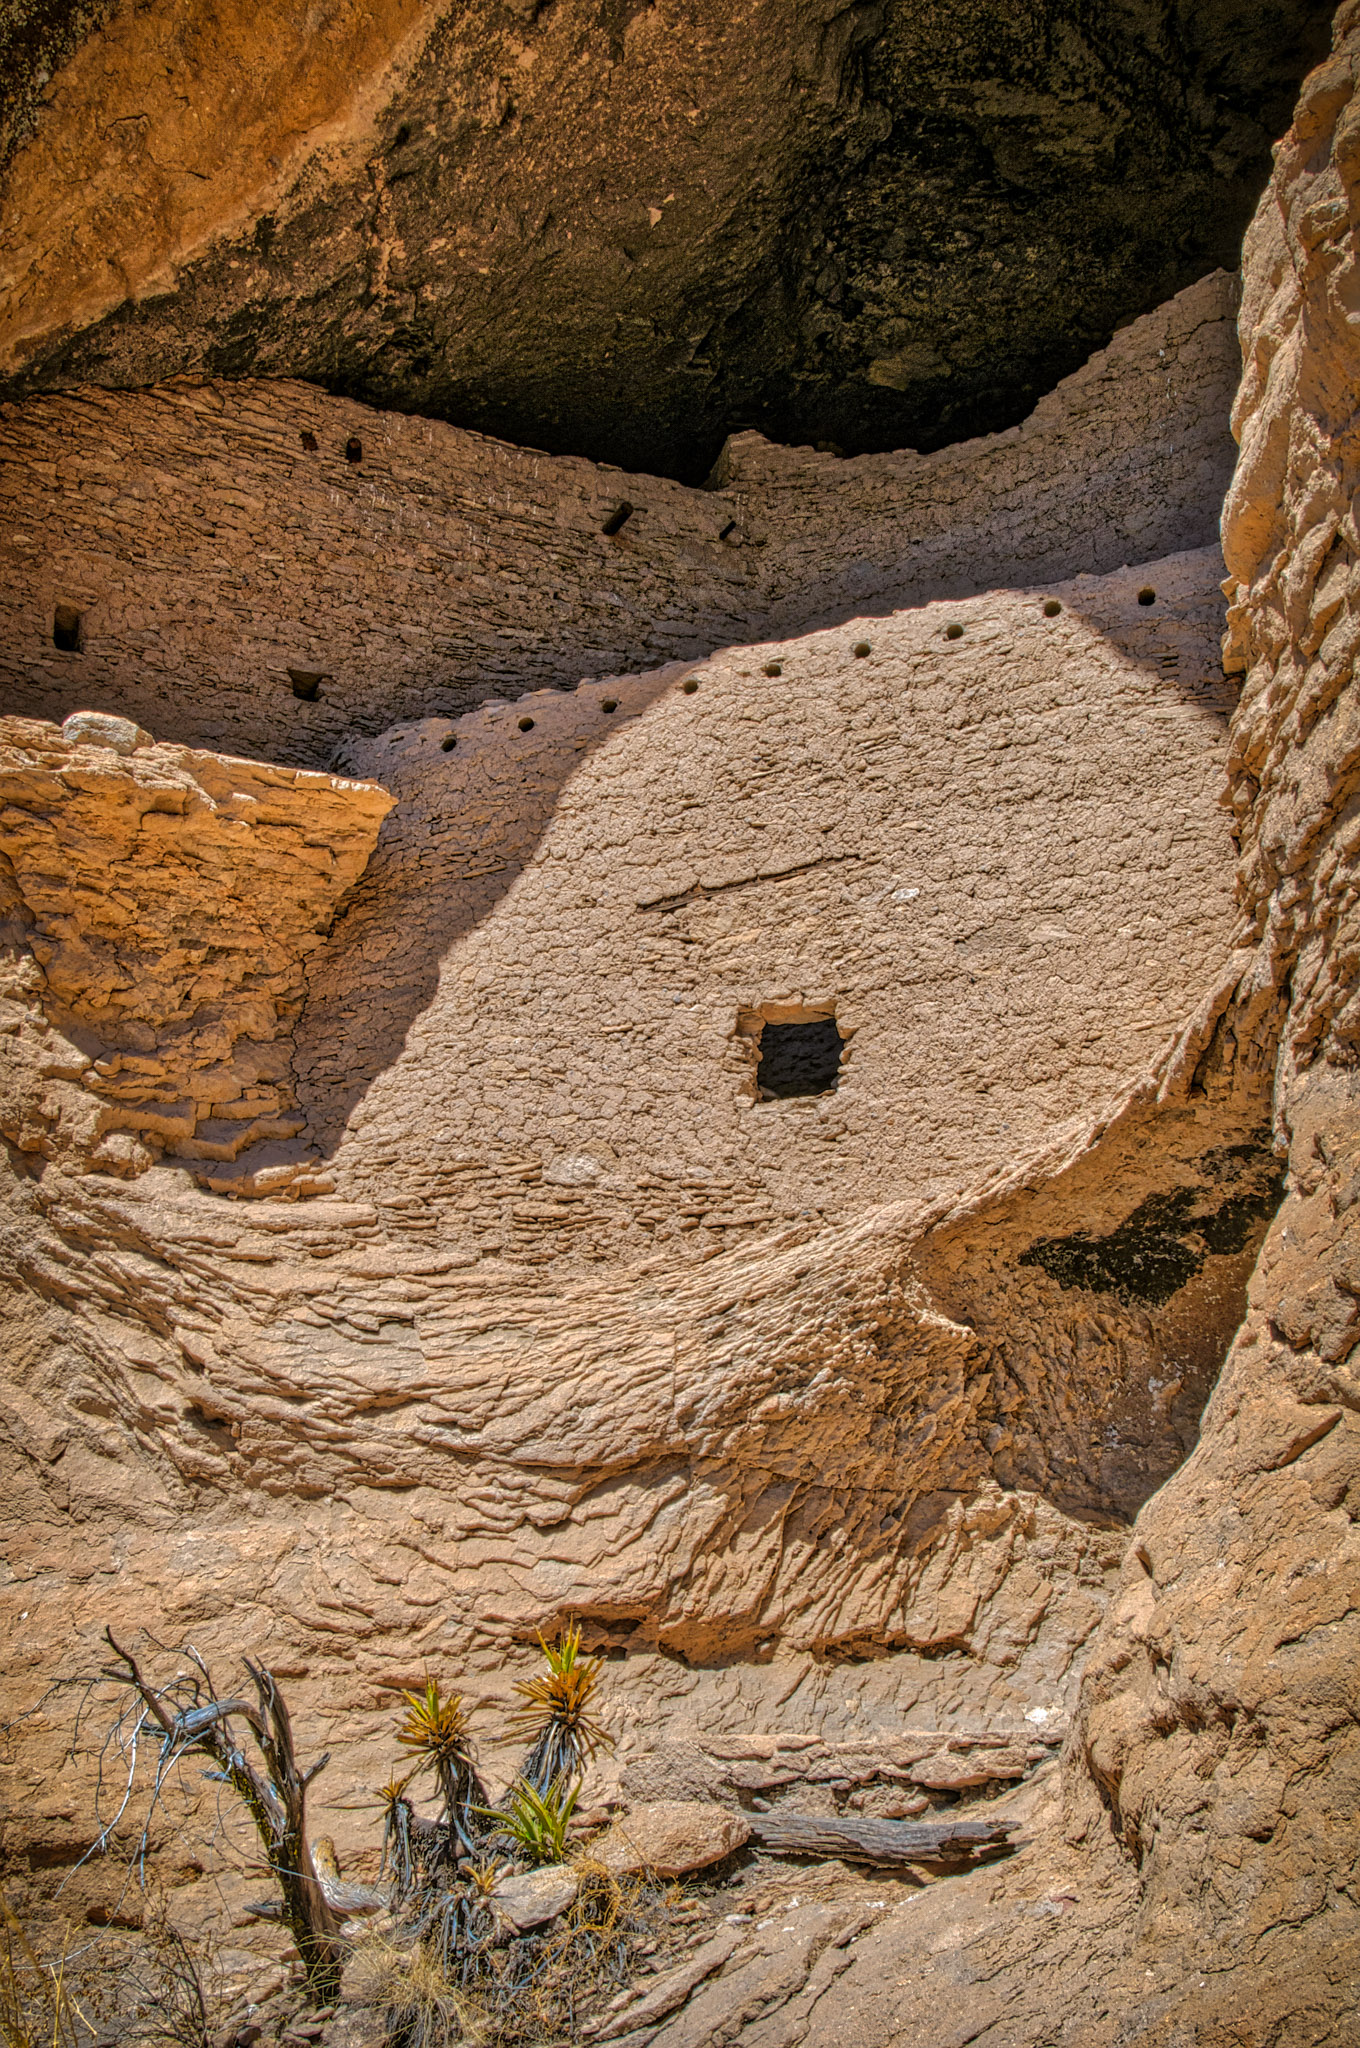 This close-up of Mogollon stone masonry highlights the technical expertise of these ancient builders in integrating their structures into the country rock at Gila Cliff Dwellings National Monument.